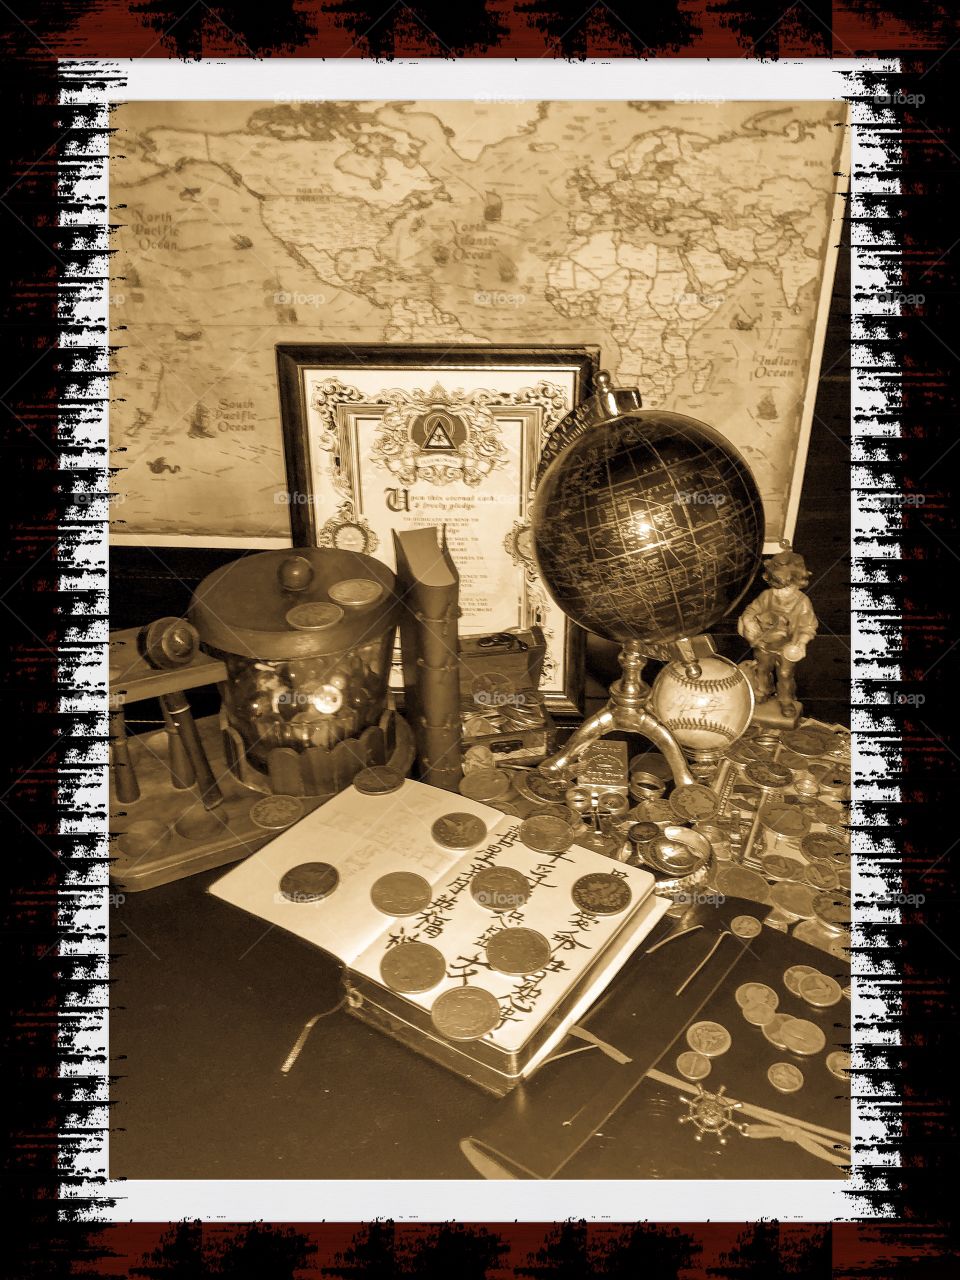 Inspiration struck from my silver dollar and old world ways so here is my grandfather’s tobacco station and pipe with old world maps and coins. Not all American without a timeless autographed baseball, nautical books and the language development. 